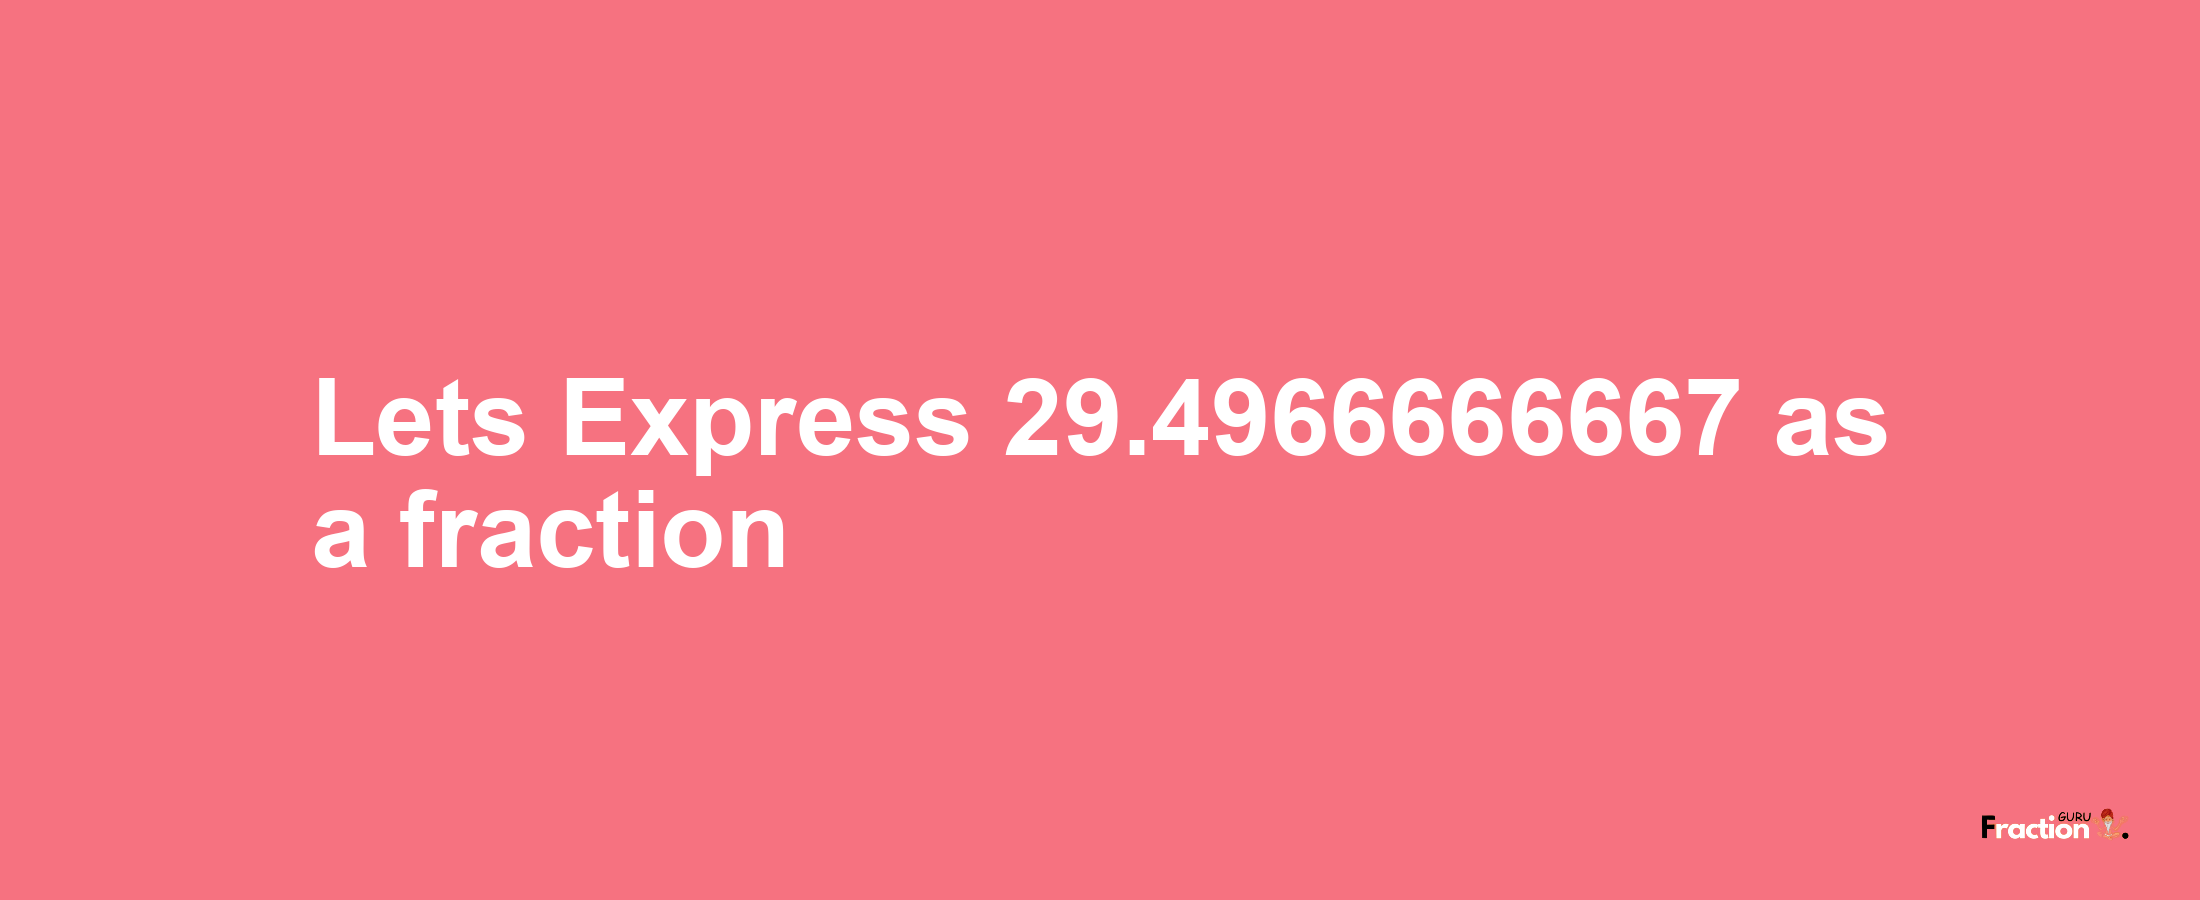 Lets Express 29.4966666667 as afraction